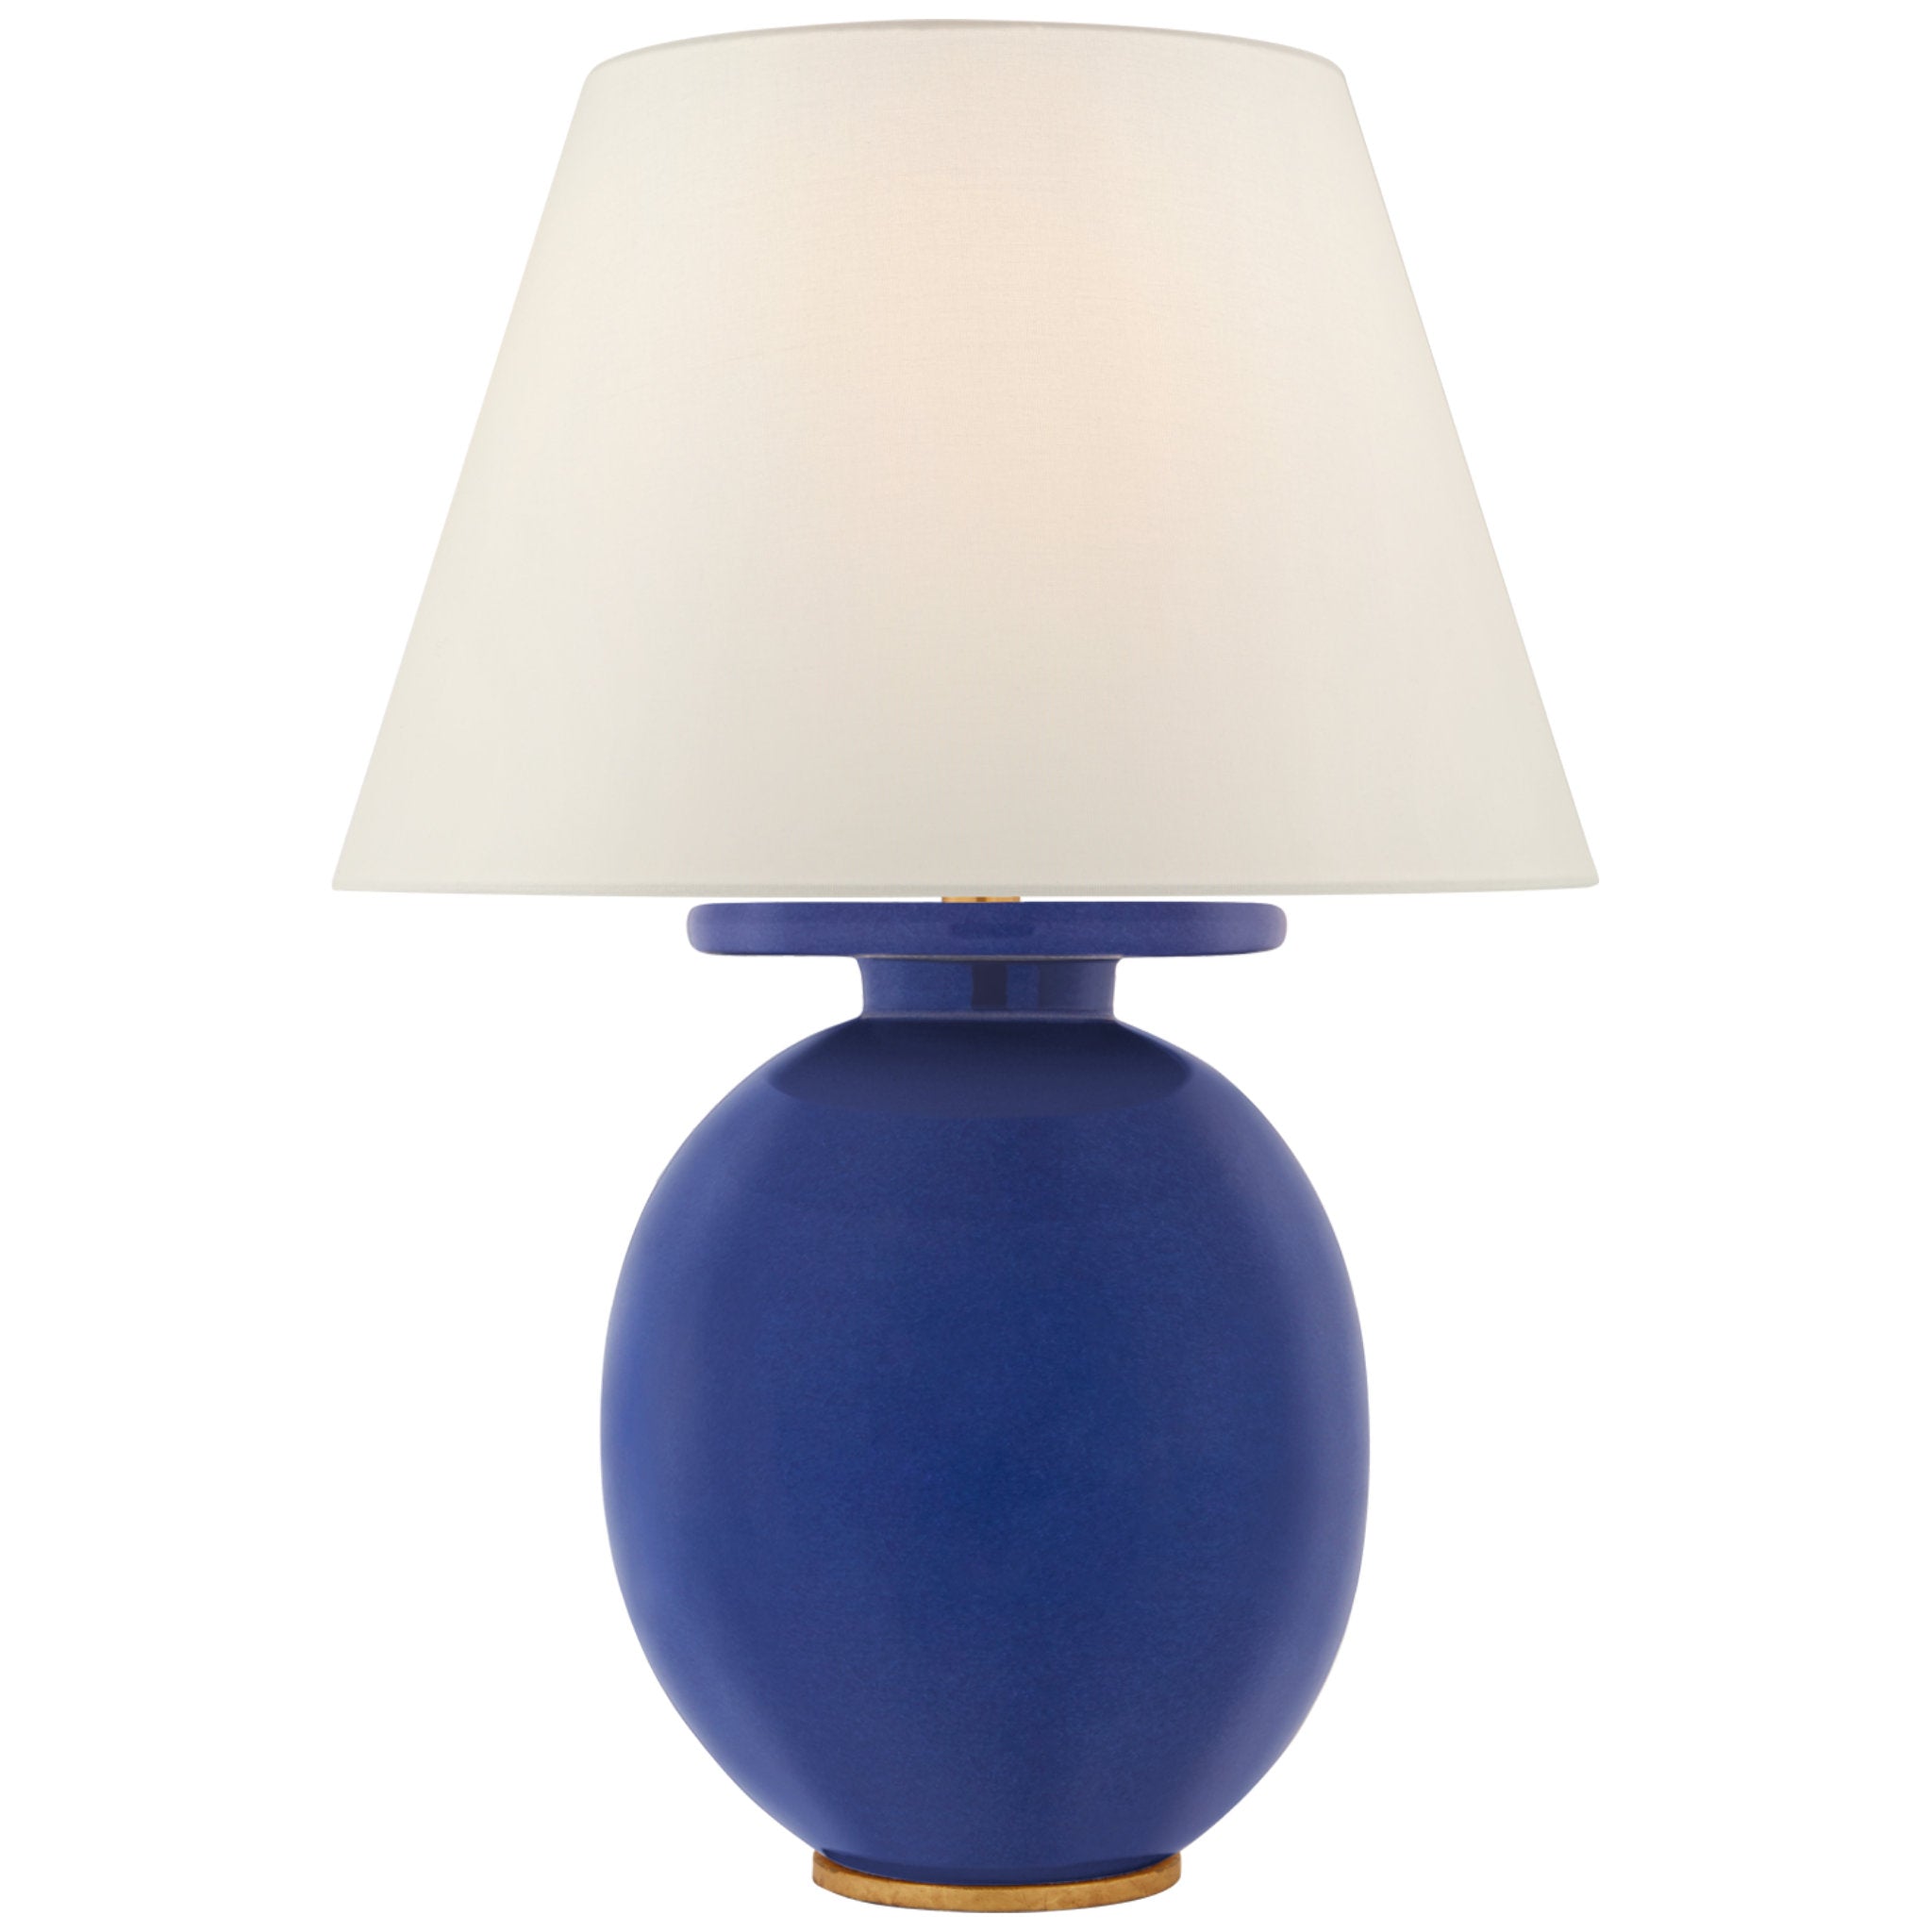 Christopher Spitzmiller Hans Medium Table Lamp in Flowing Blue with Linen Shade